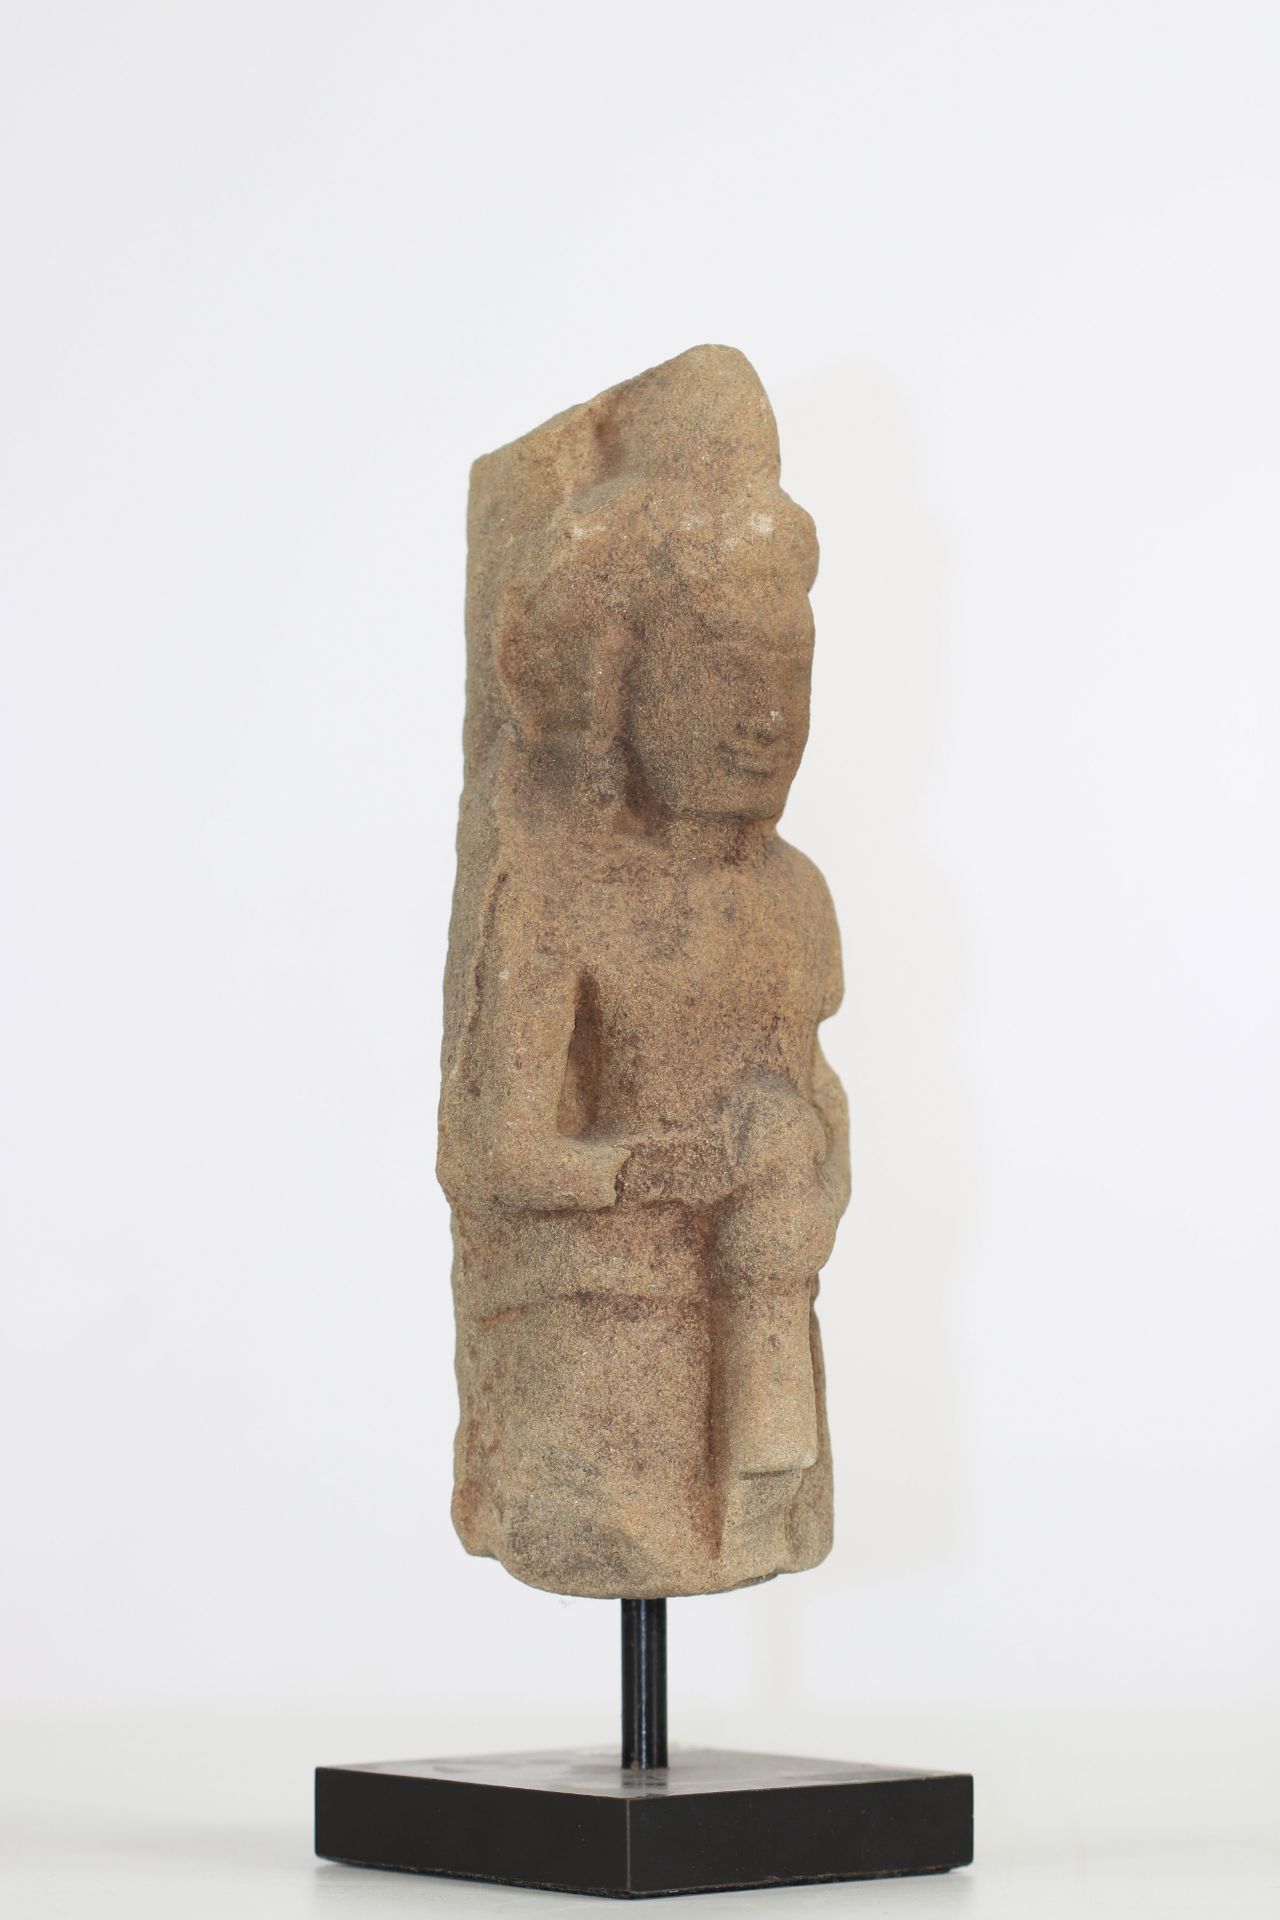 Khmer fragment - temple guard - 15th-16th century - Cambodia - Image 2 of 3